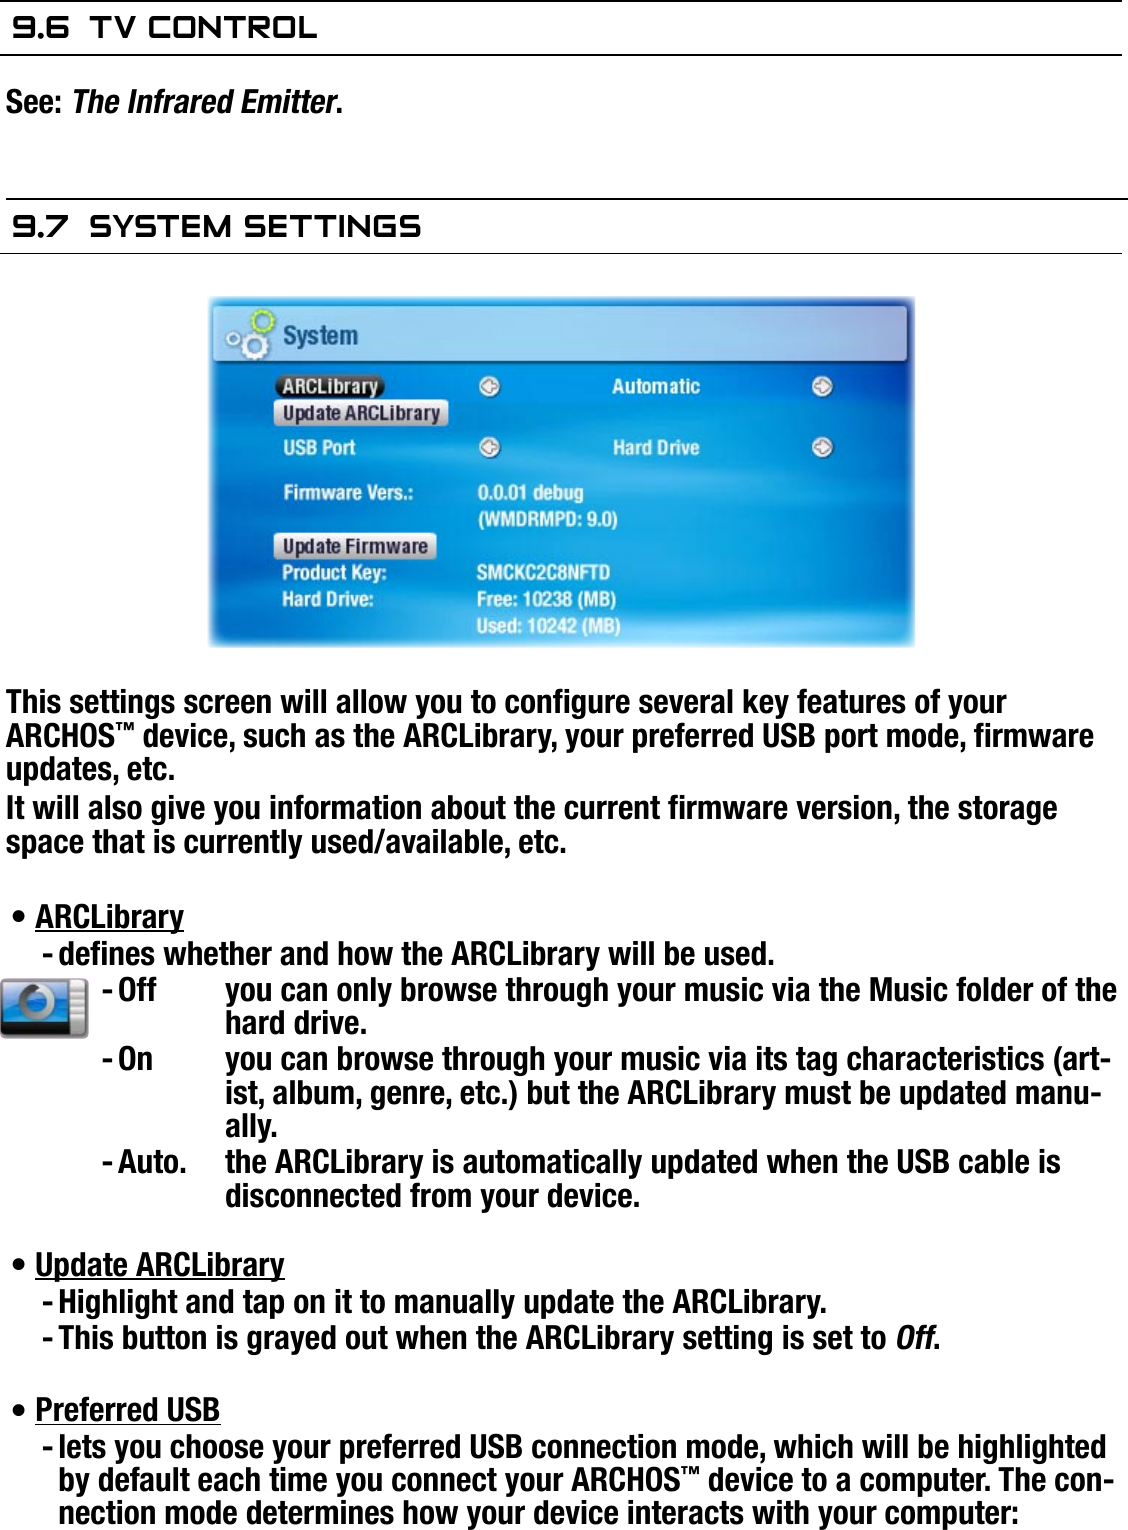 704MANUAL V0.0SETUP SCREEN   &gt;   p. 529.6  TV COnTrOlSee: The Infrared Emitter.9.7  sysTeM seTTingsThis settings screen will allow you to congure several key features of your ARCHOS™ device, such as the ARCLibrary, your preferred USB port mode, rmware updates, etc.It will also give you information about the current rmware version, the storage space that is currently used/available, etc.ARCLibrarydenes whether and how the ARCLibrary will be used.Off  you can only browse through your music via the Music folder of the hard drive.On  you can browse through your music via its tag characteristics (art-ist, album, genre, etc.) but the ARCLibrary must be updated manu-ally.Auto.  the ARCLibrary is automatically updated when the USB cable is disconnected from your device.Update ARCLibraryHighlight and tap on it to manually update the ARCLibrary.This button is grayed out when the ARCLibrary setting is set to Off.Preferred USBlets you choose your preferred USB connection mode, which will be highlighted by default each time you connect your ARCHOS™ device to a computer. The con-nection mode determines how your device interacts with your computer:•----•--•-